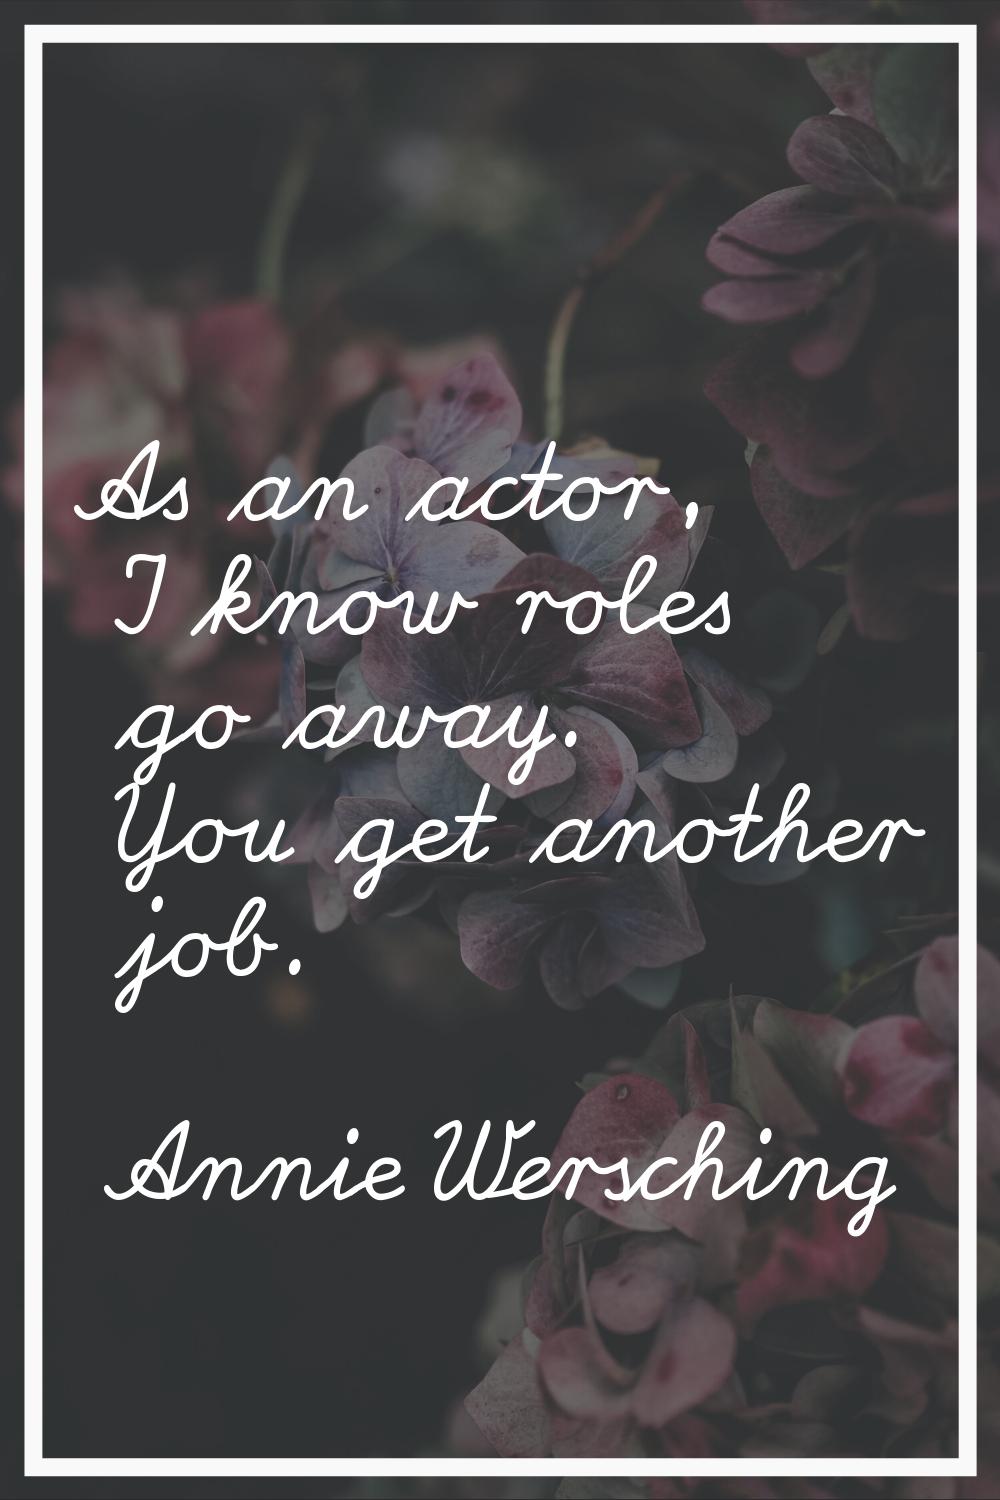 As an actor, I know roles go away. You get another job.